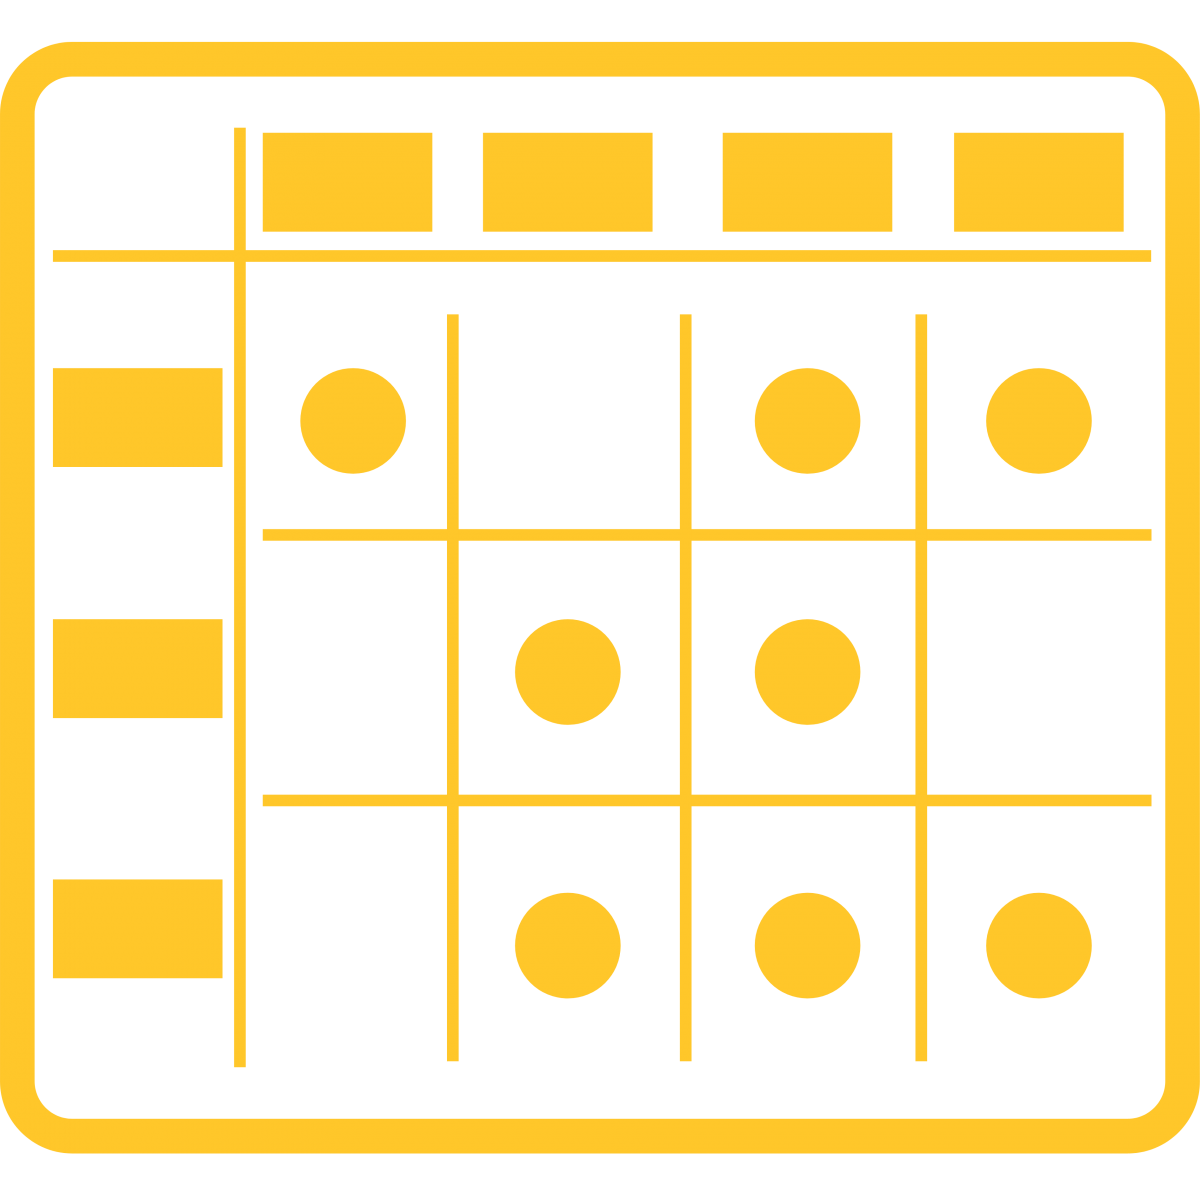 A yellow calendar marked by yellow dots. 